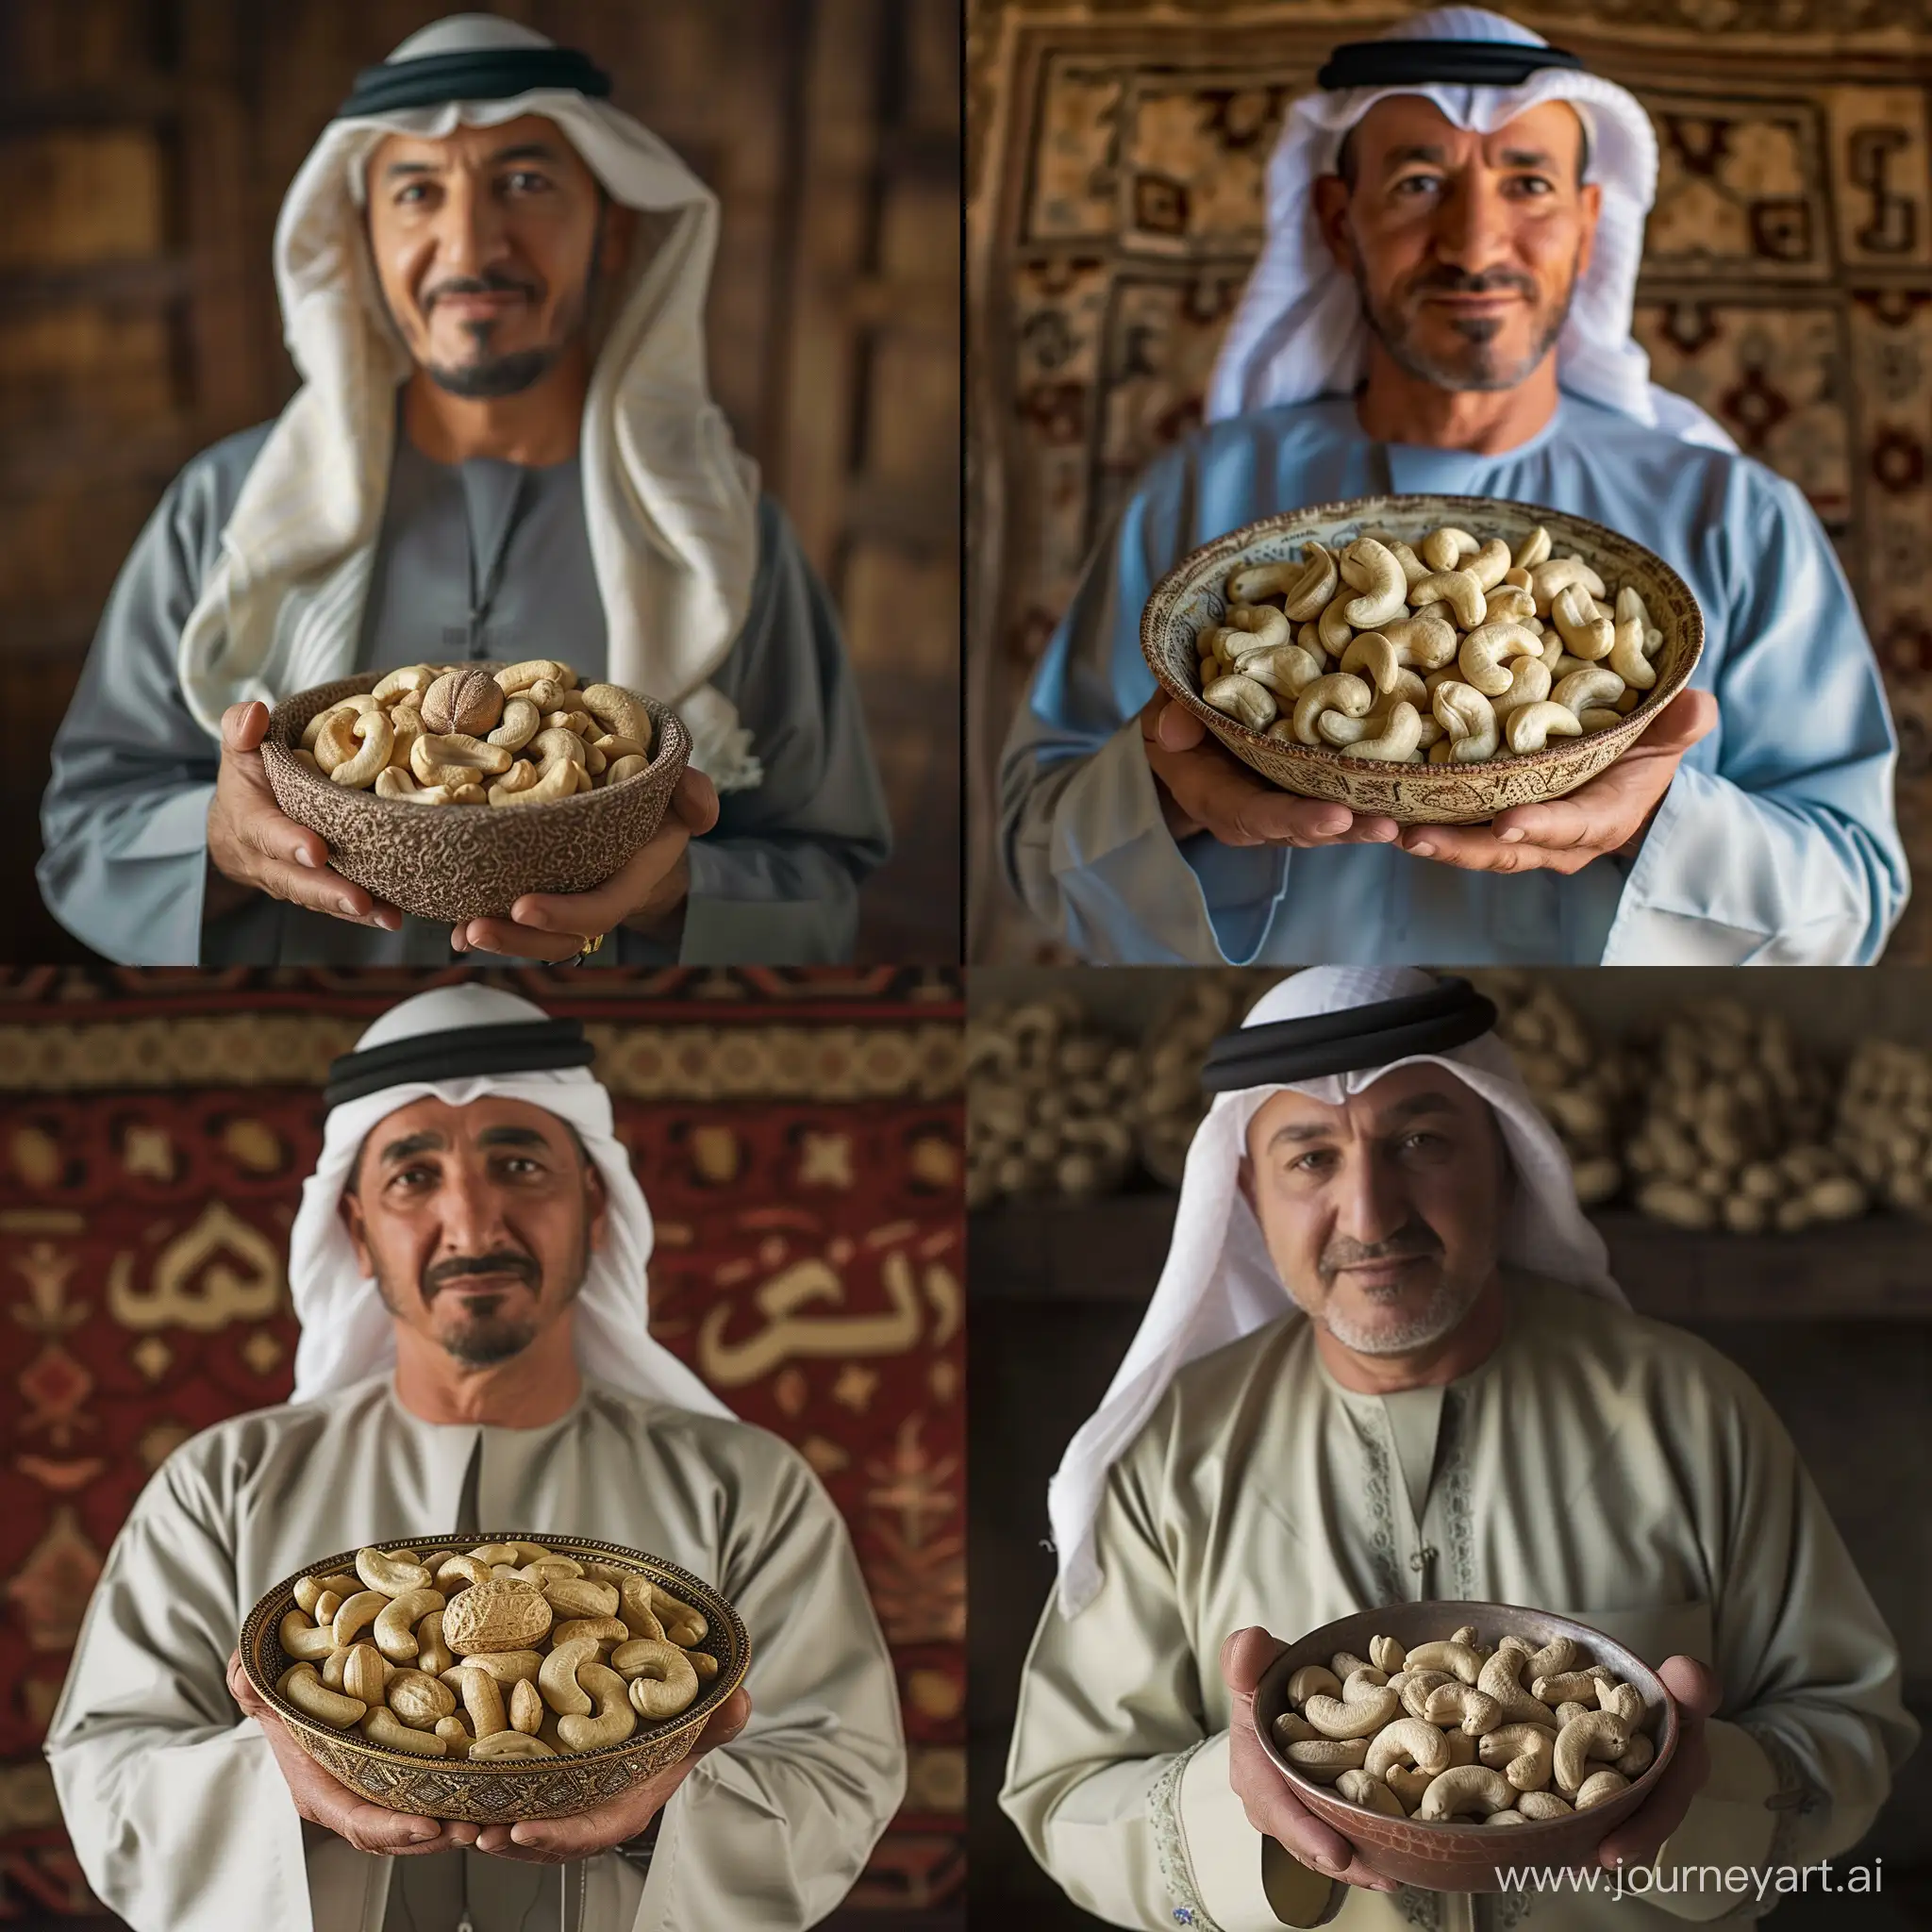 MiddleAged-Arab-Man-Showcasing-Fresh-Cashew-Nuts-in-Exquisite-Bowl